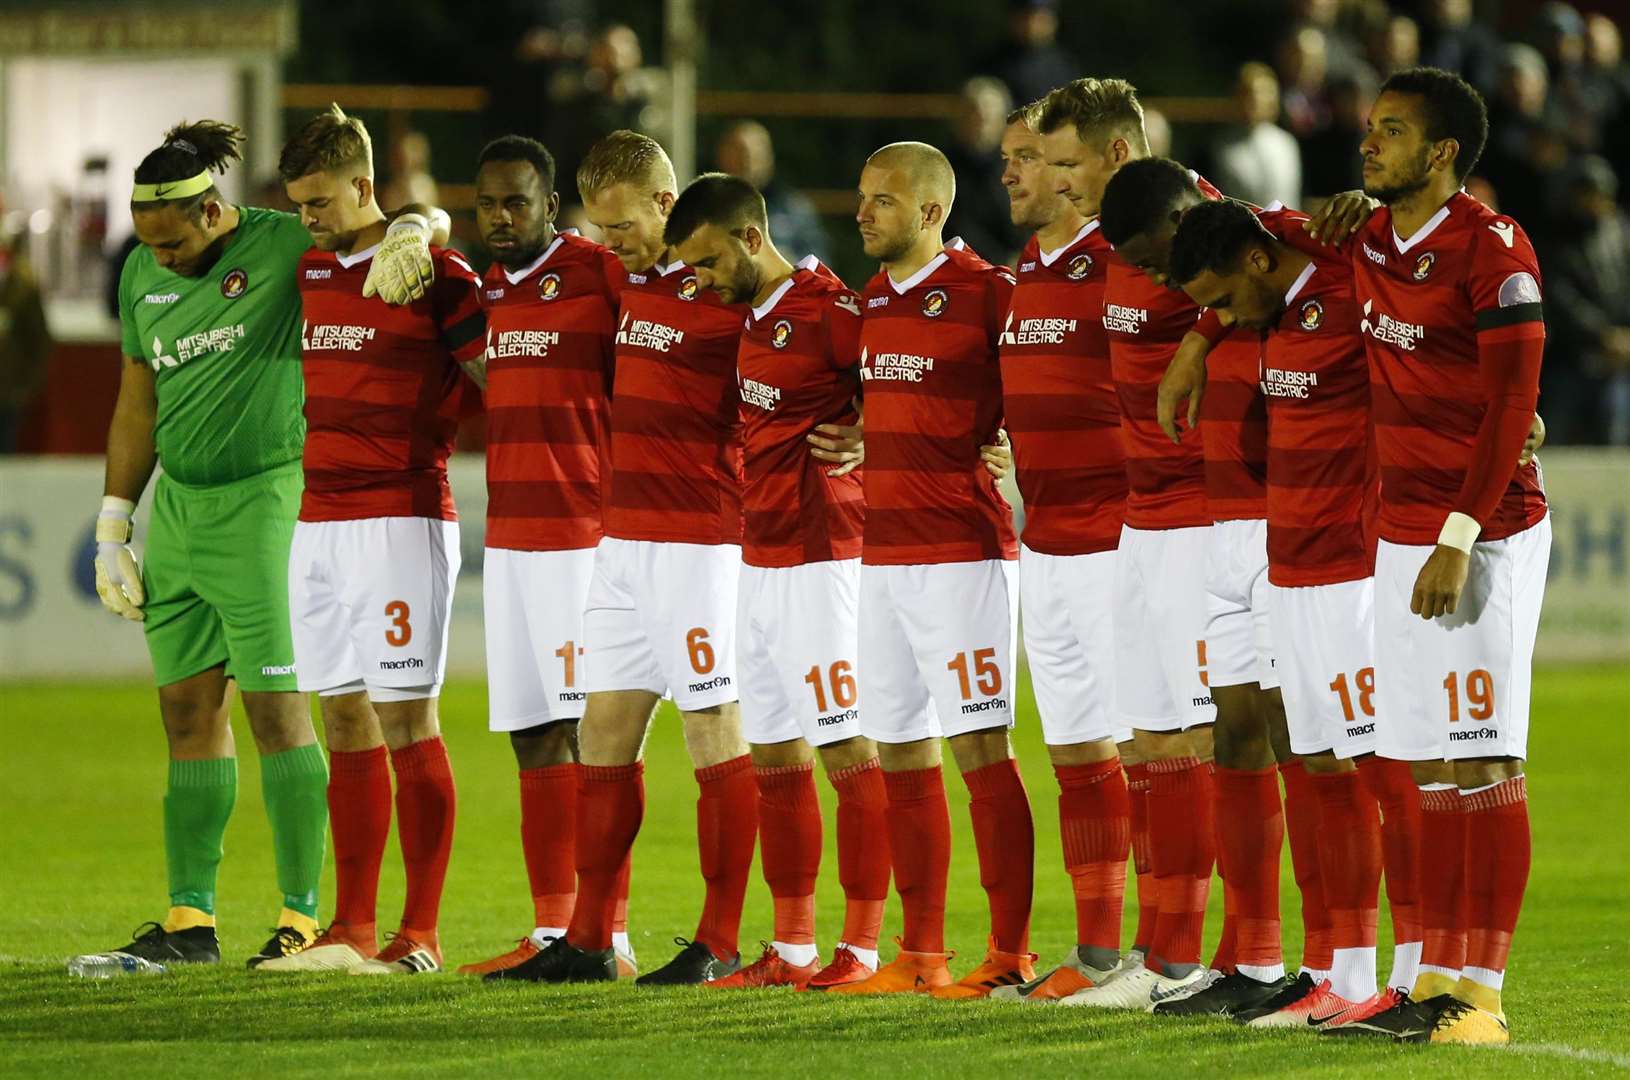 Ebbsfleet's players observing a minute's silence earlier this season. Picture: Andy Jones